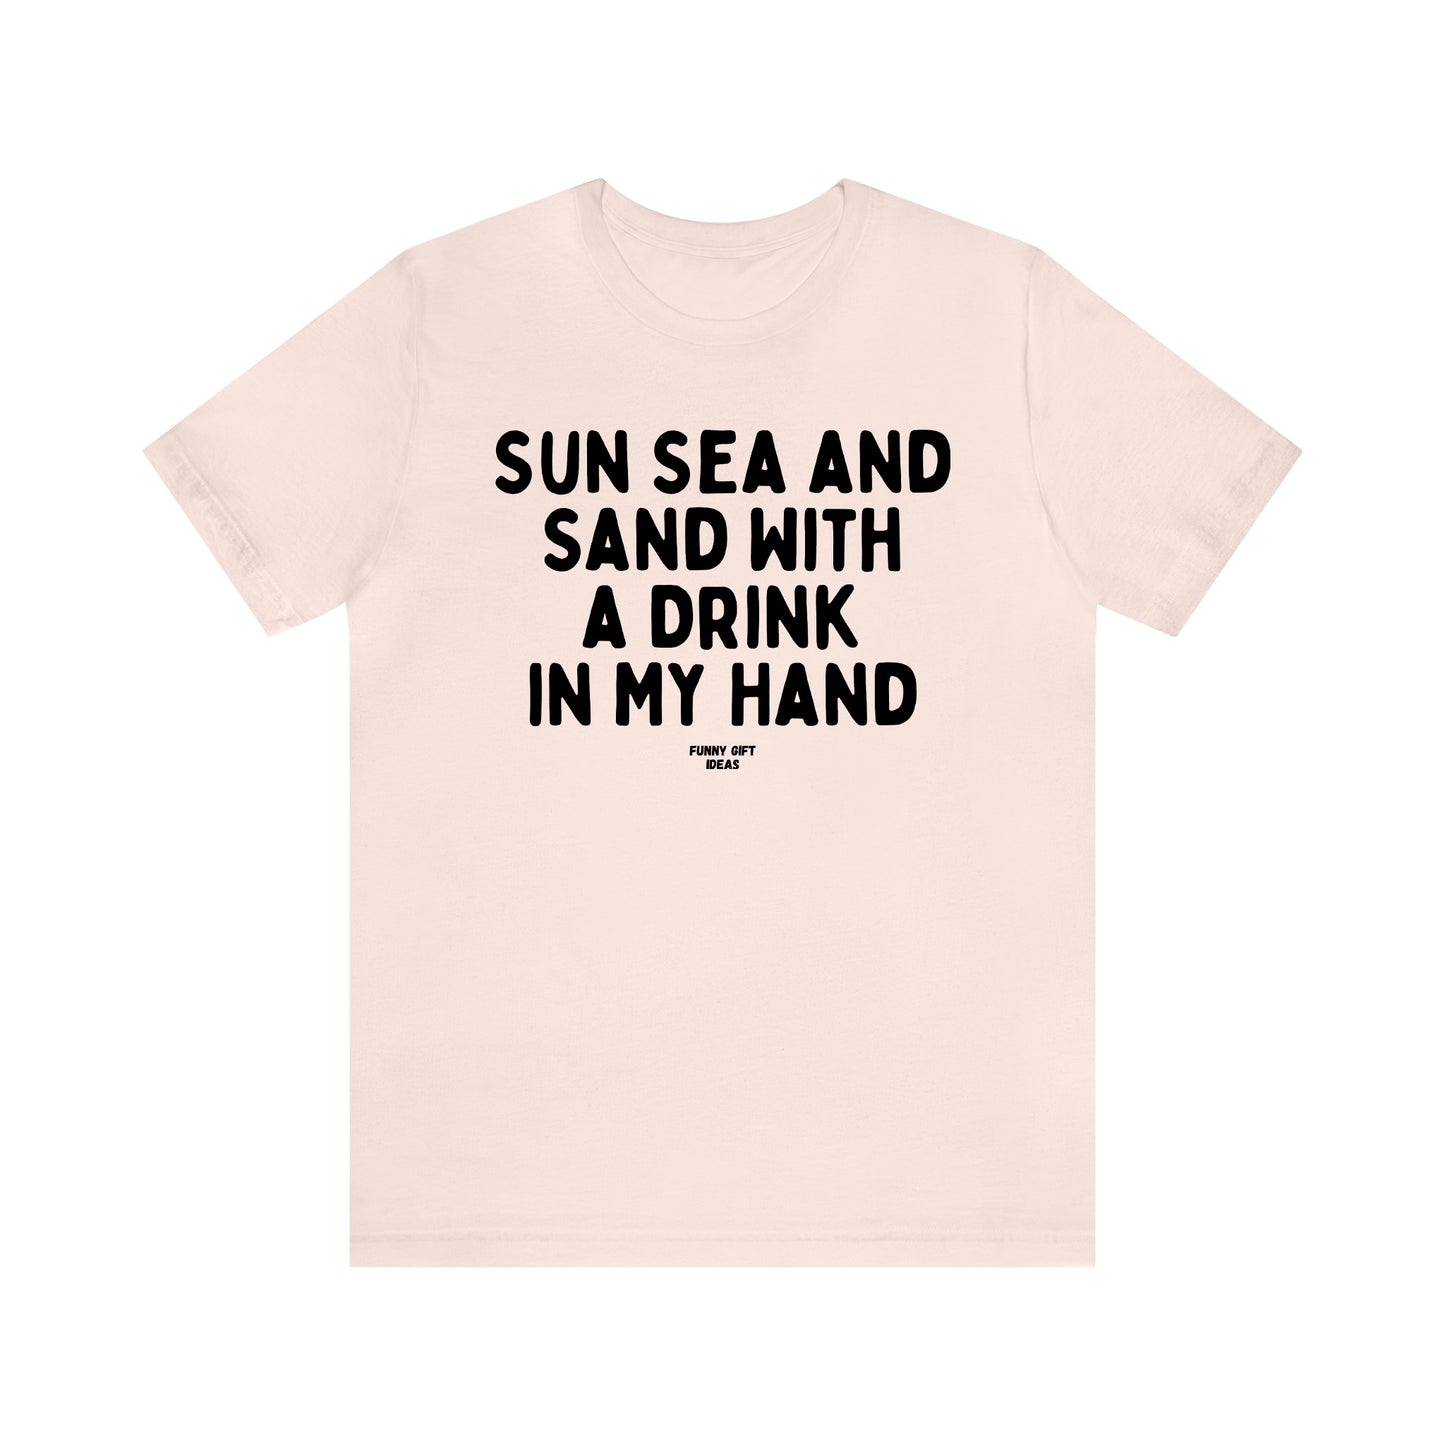 Funny Shirts for Women - Sun Sea and Sand With a Drink in My Hand - Women's T Shirts